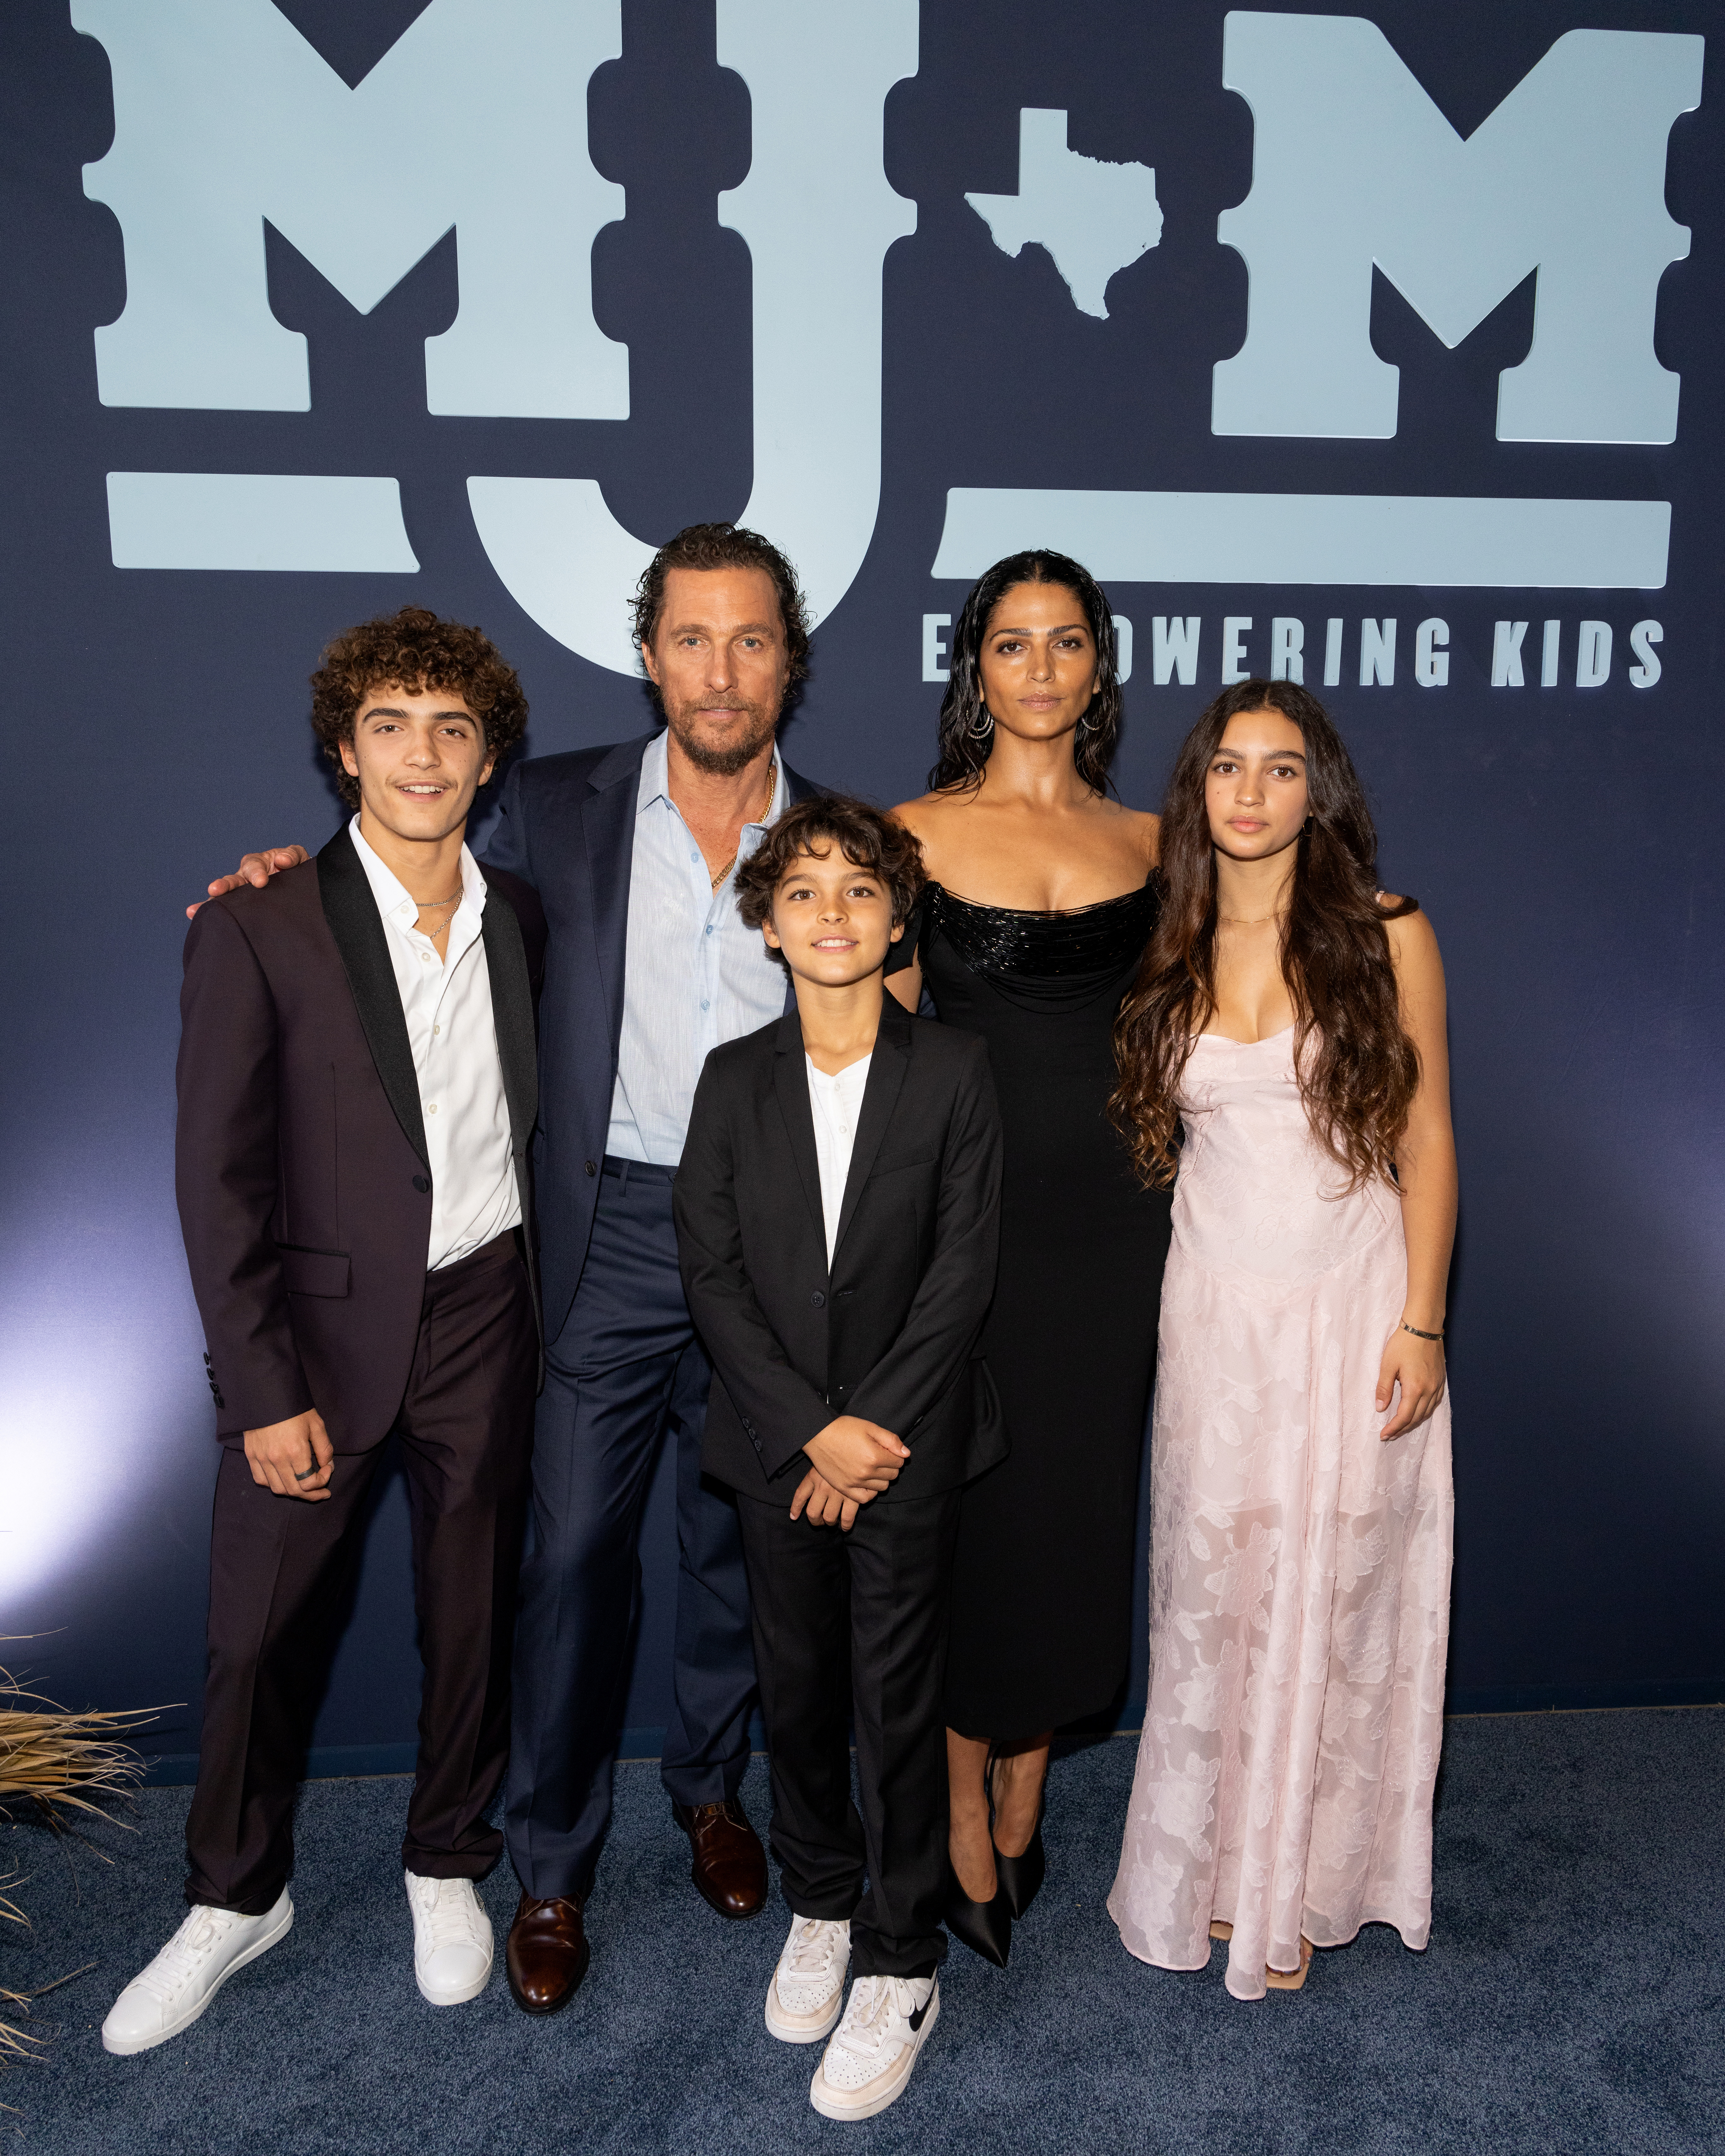 Matthew McConaughey and Camila Alves with their three children Levi, Livingston, and Vida attend the 12th Annual Mack, Jack & McConaughey Gala at ACL Live on April 25, 2024, in Austin, Texas. | Source: Getty Images